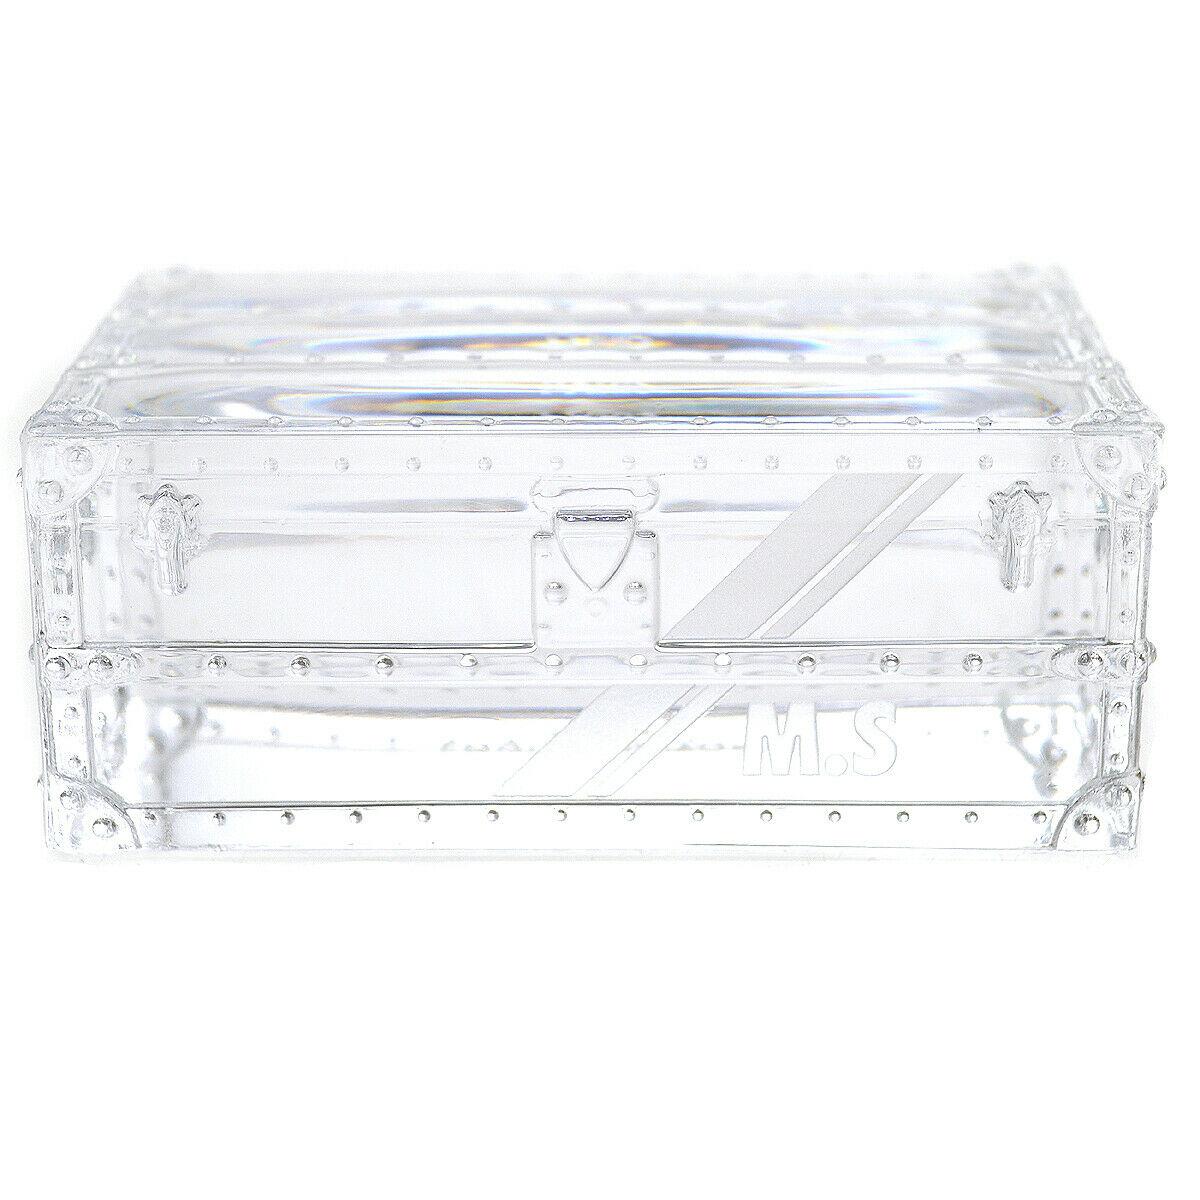 Louis Vuitton NEW Clear Crystal Trunk Desk Table Decorative Paperweight in Box

Crystal
Made in France
Measures 3.25